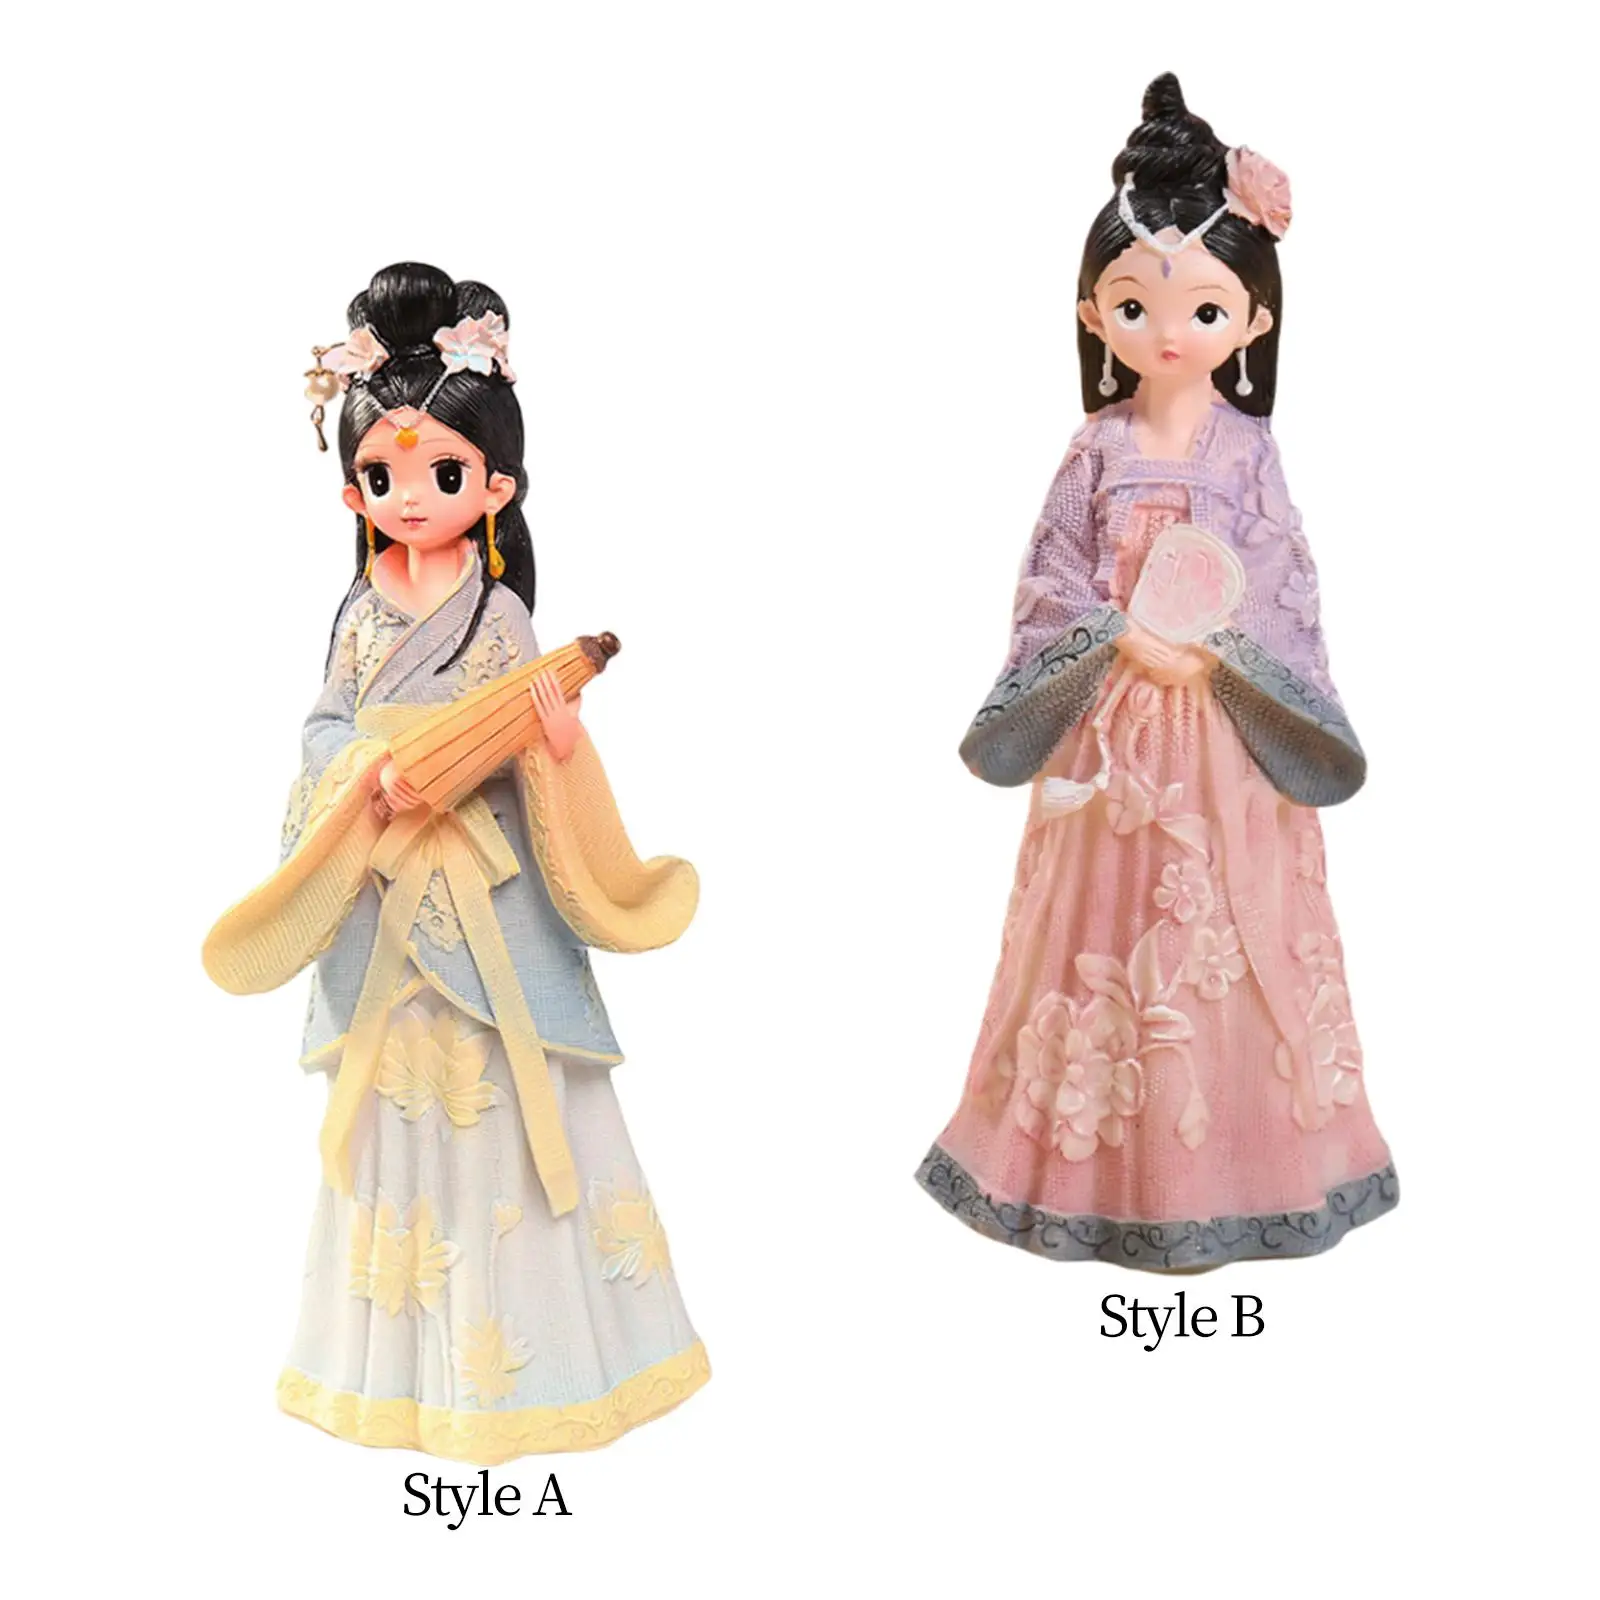 Girl Figurine Chinese Costume Collection Ornament for Photo Props Home Decor Car